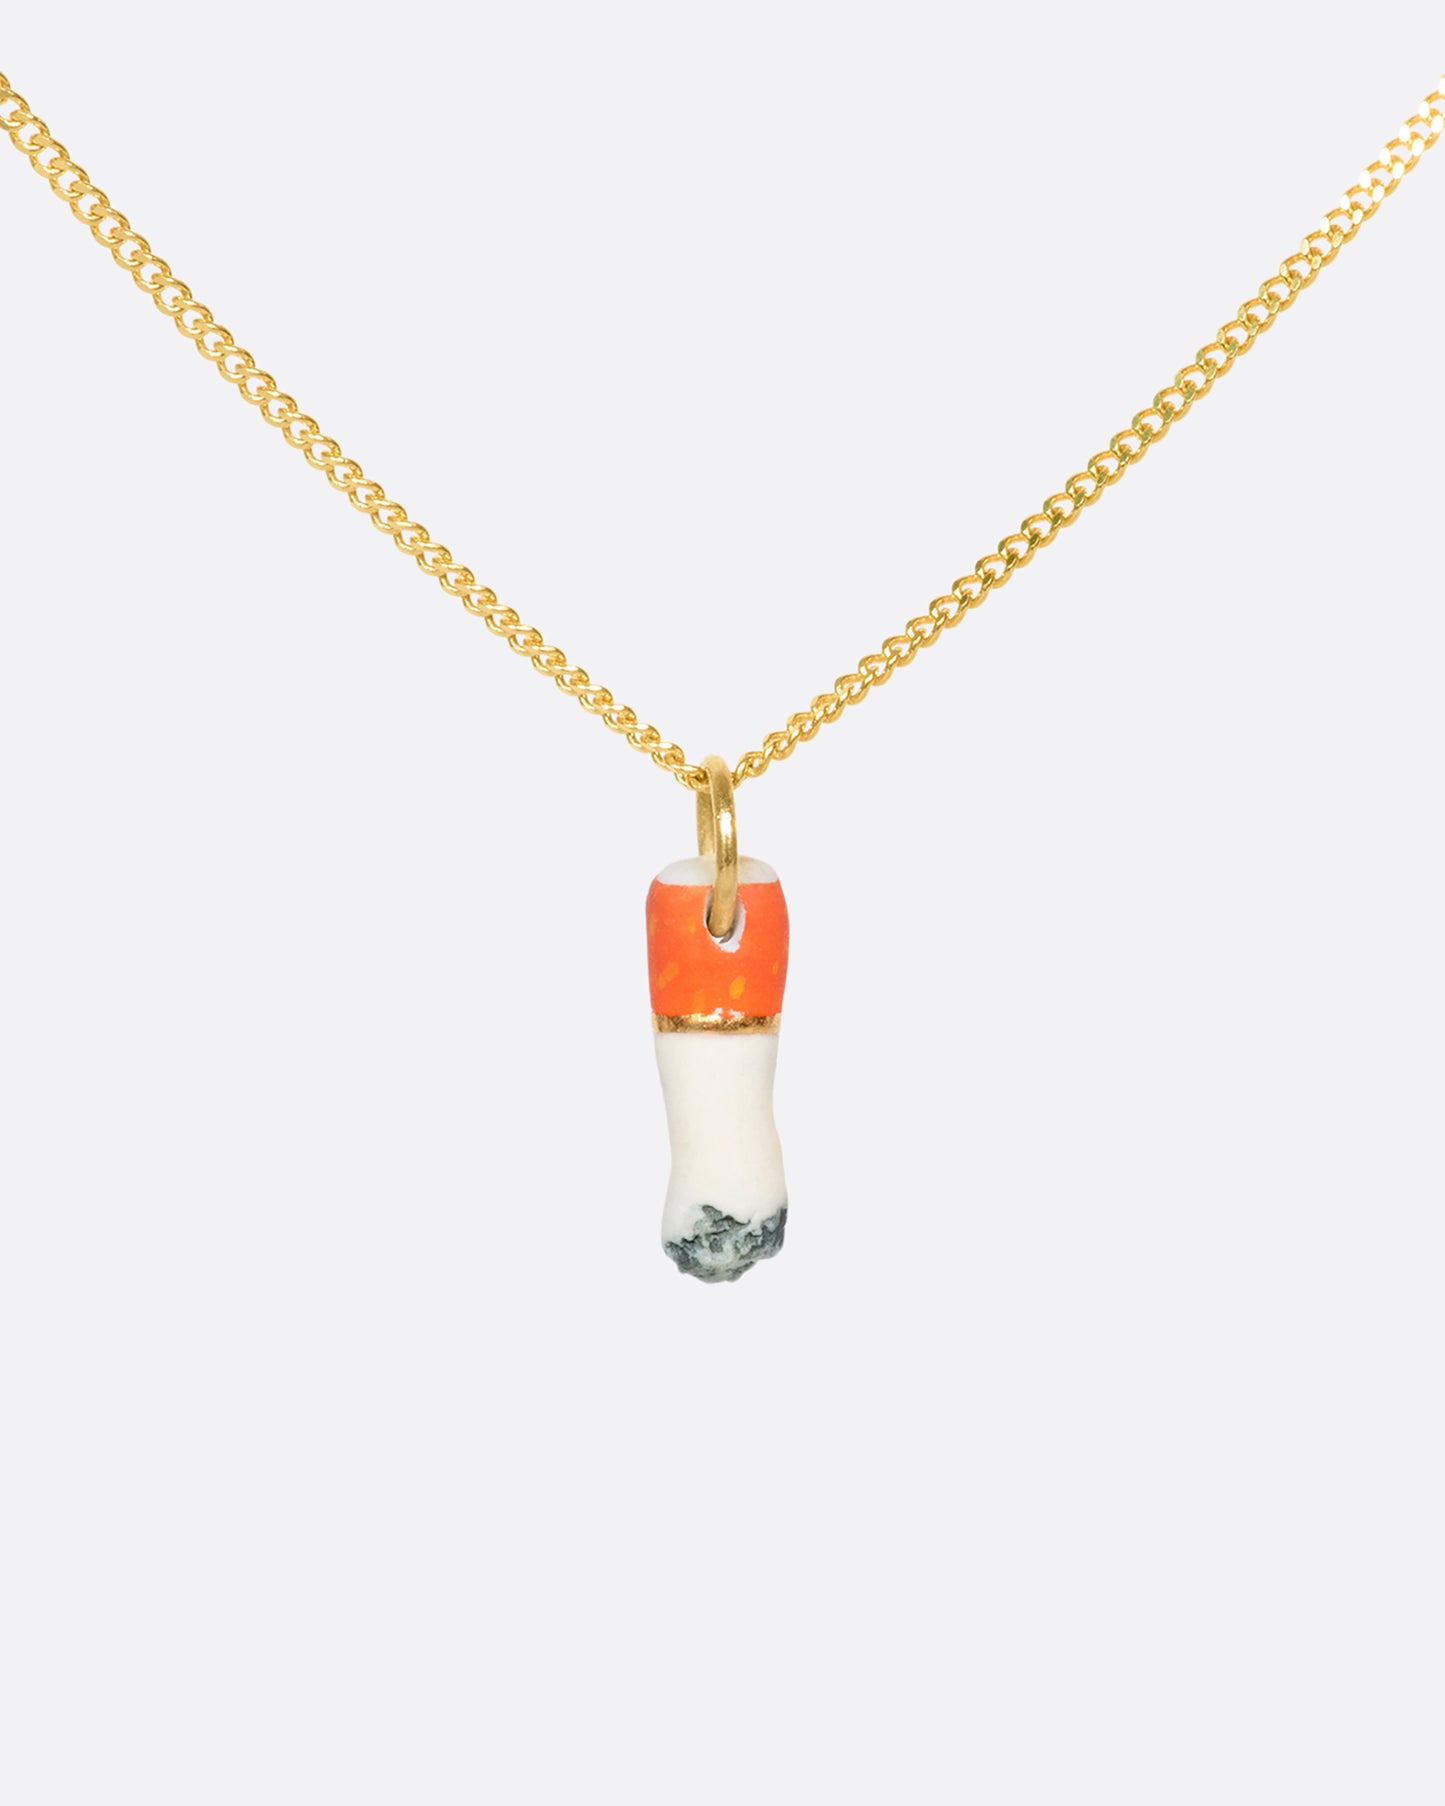 A view of a porcelain cigarette charm on a yellow gold bail hanging on a gold chain.